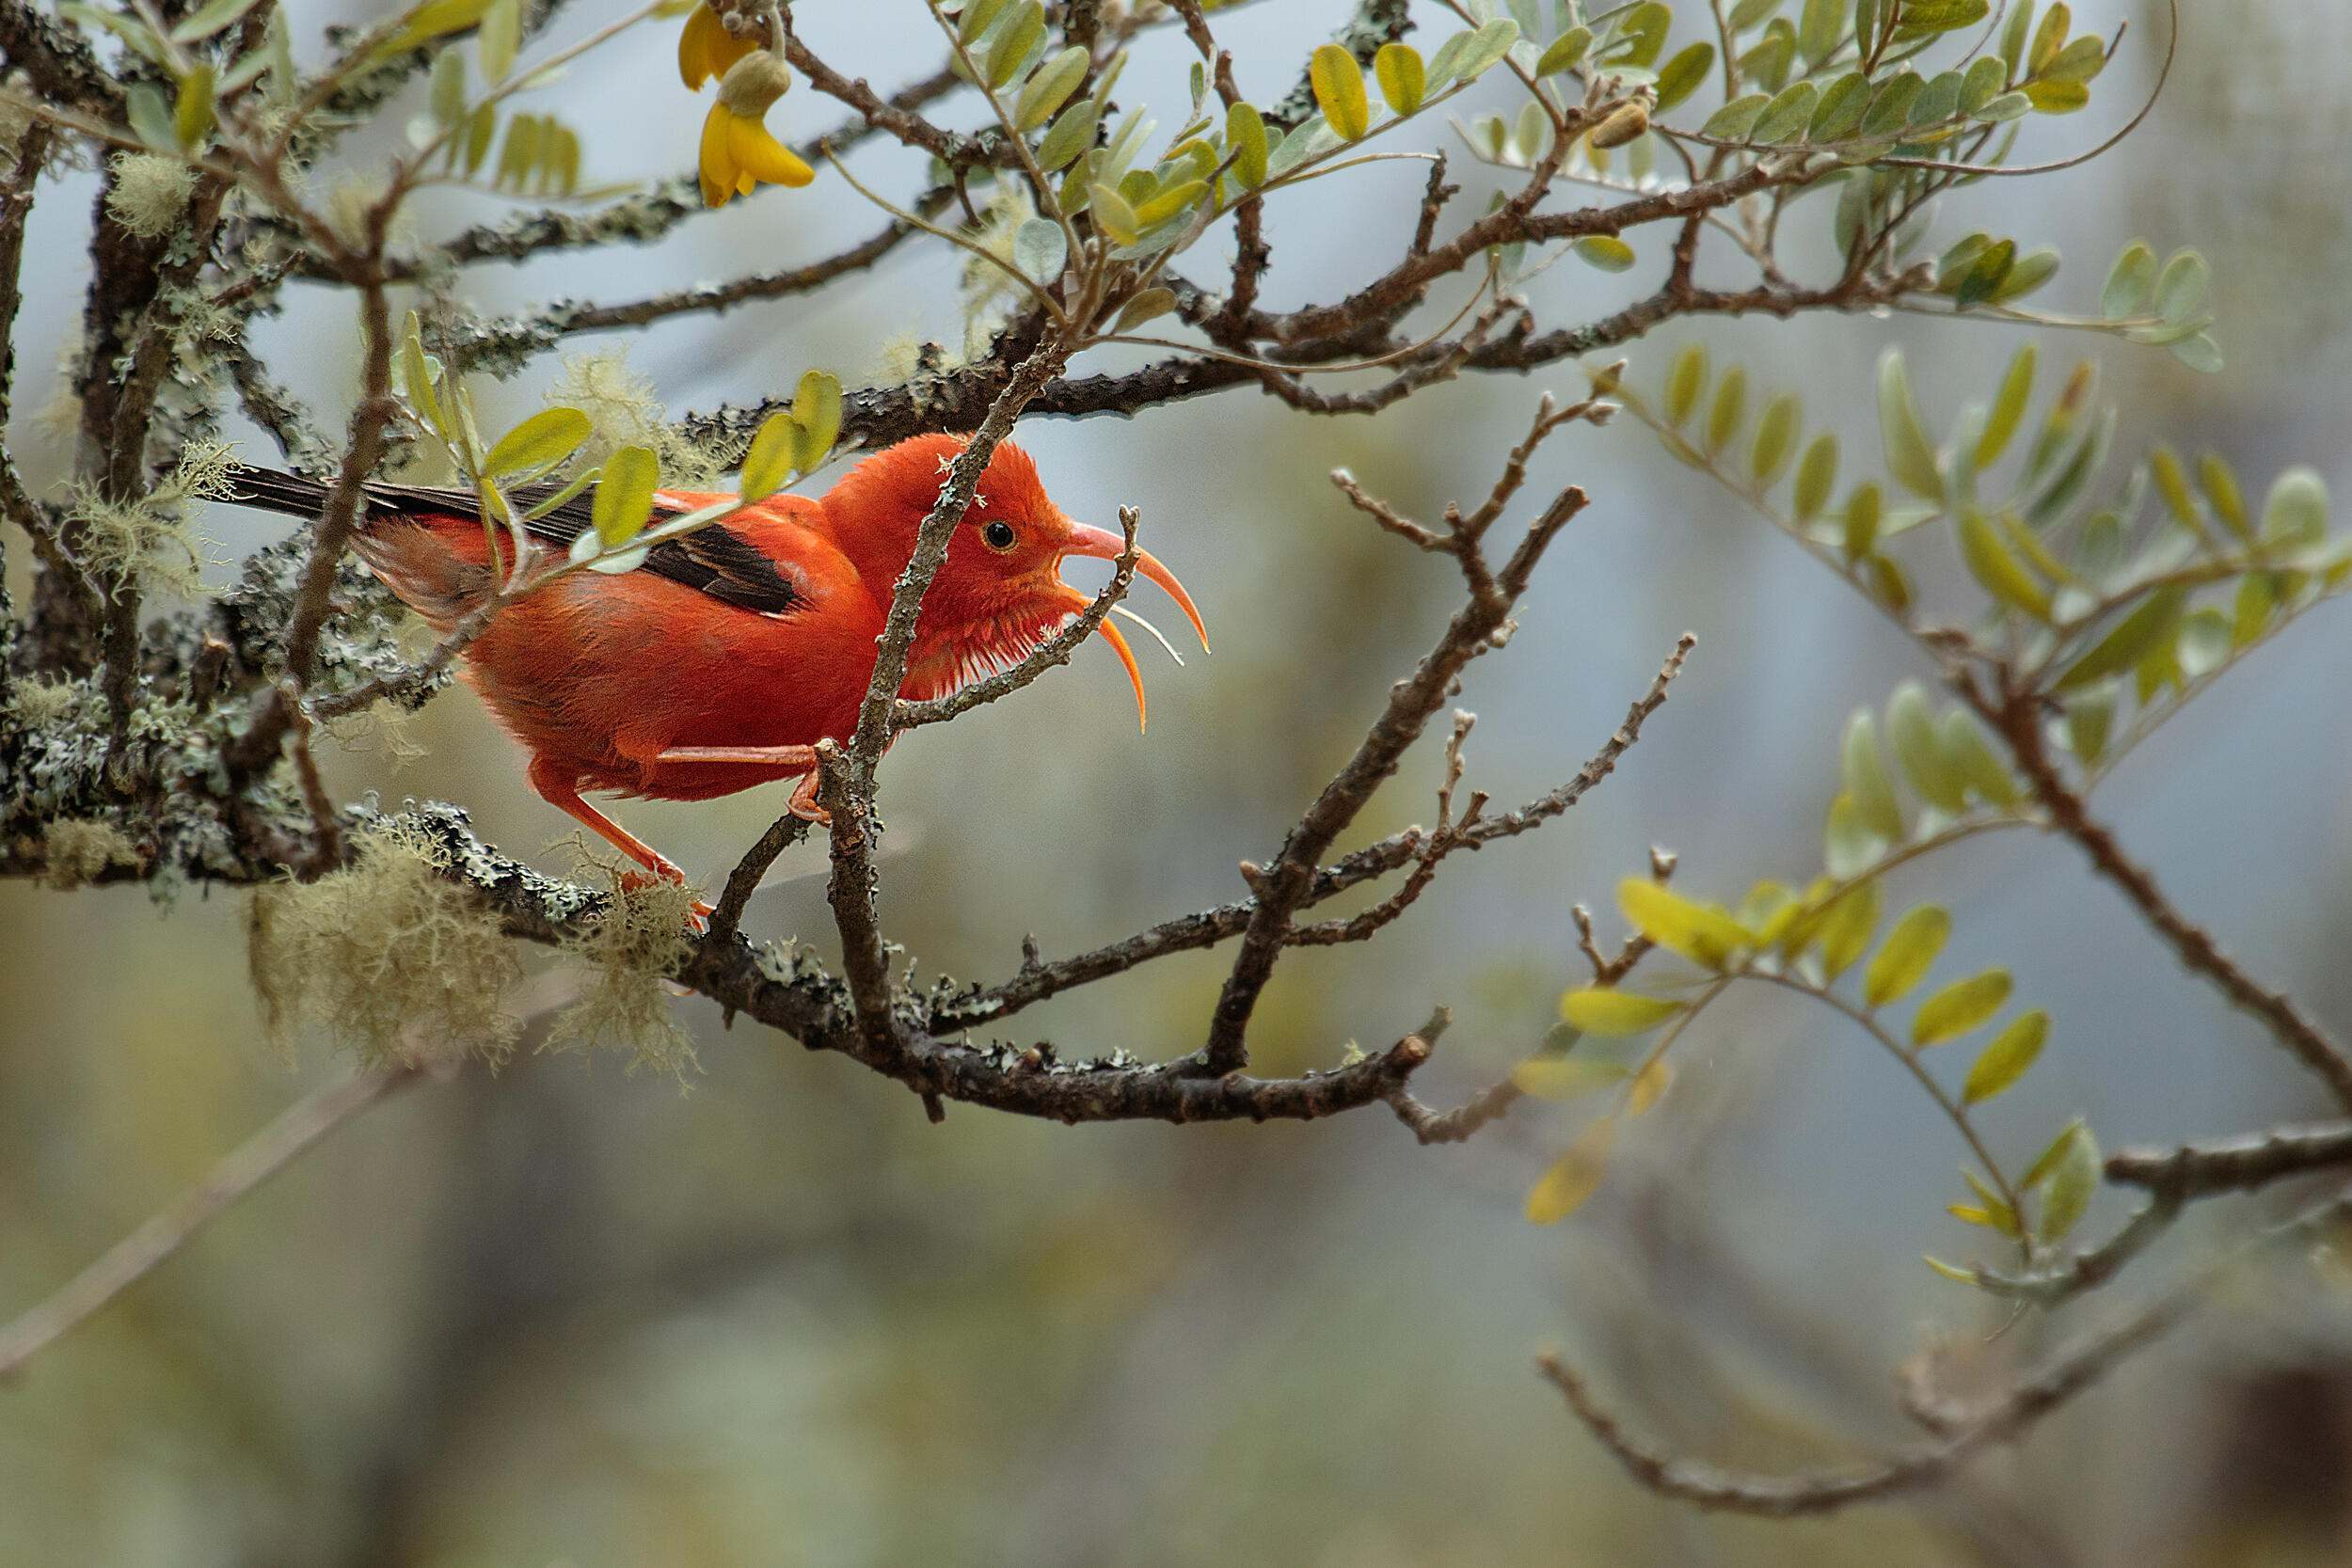 scarlet bird with long beak perches on a moss covered branch